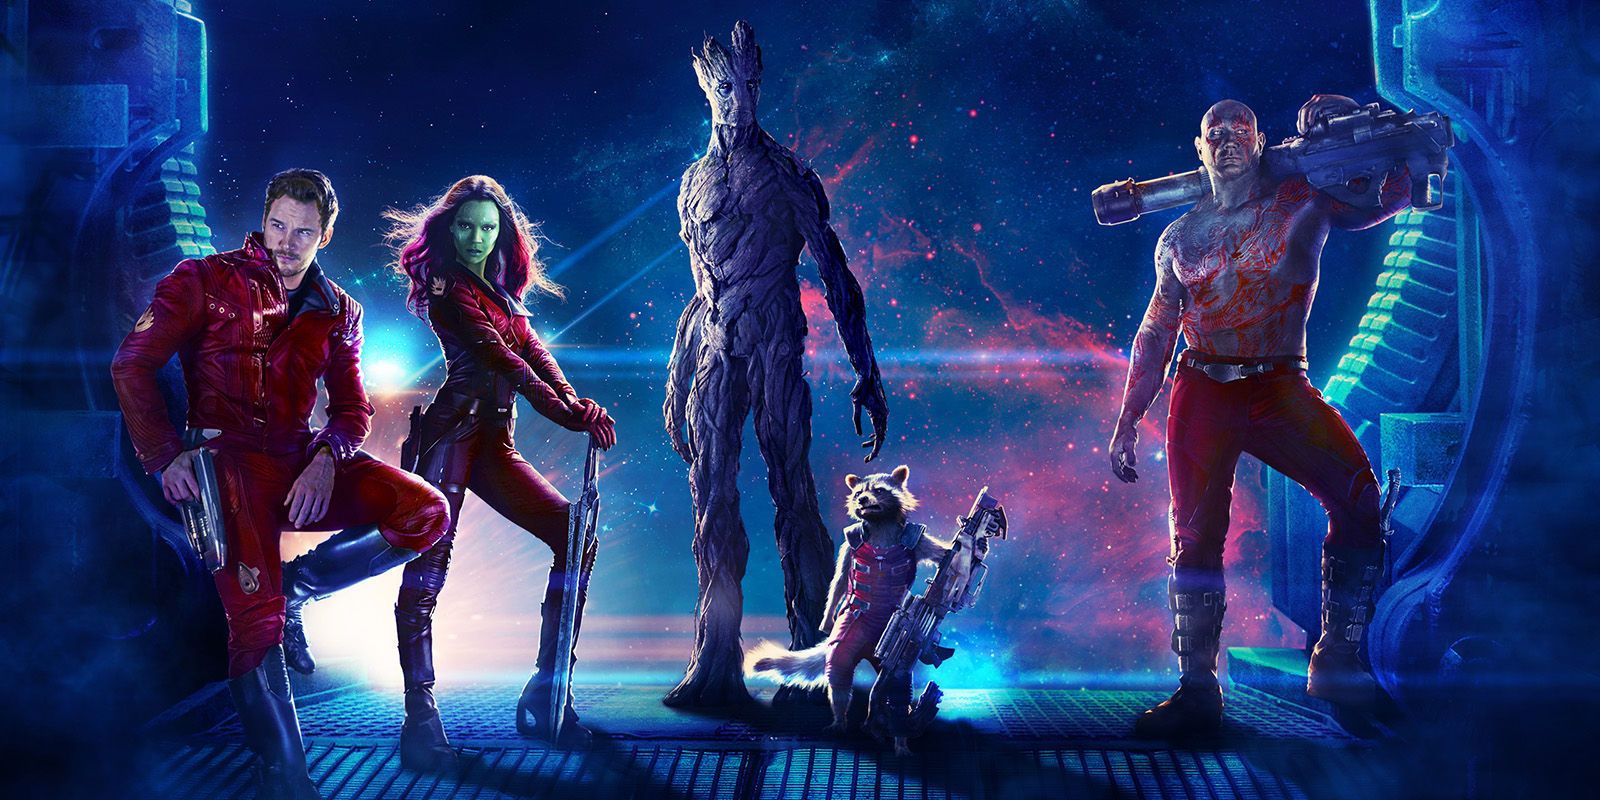 Image of the Day: James Gunn shares final Guardians of the Galaxy 2 storyboard shot